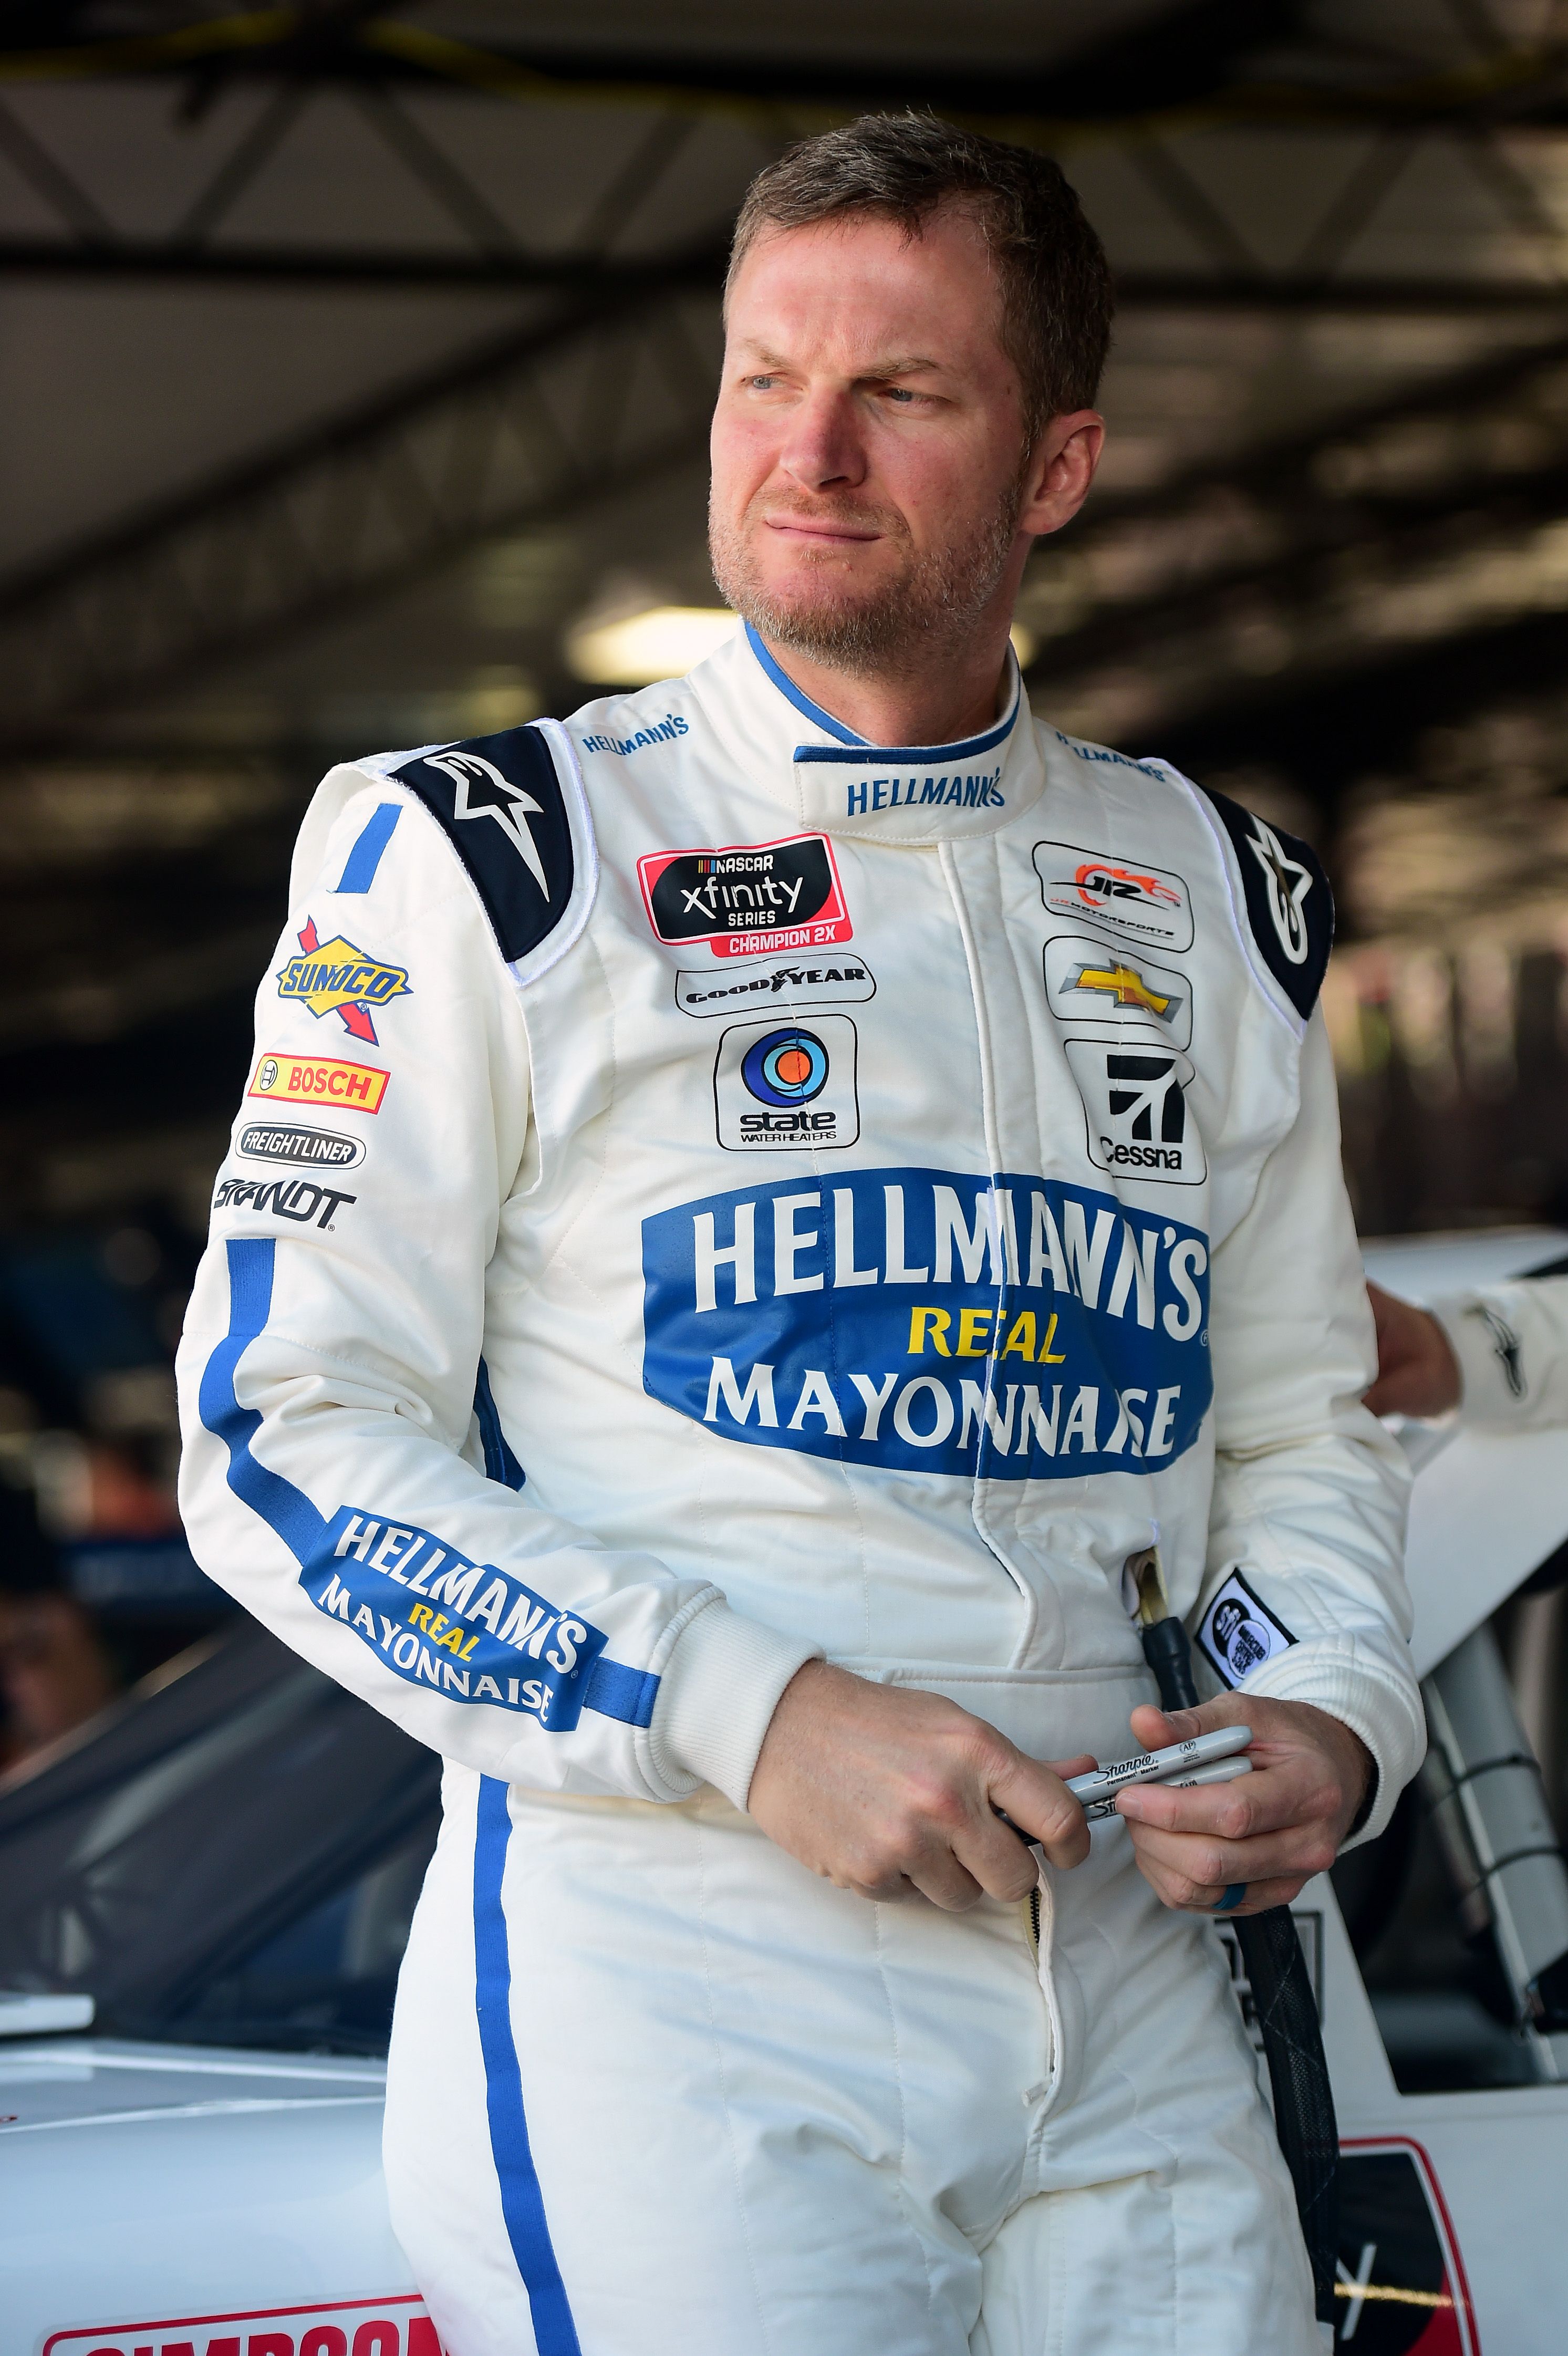 Dale Earnhardt Jr. in the garage area during practice for the NASCAR Xfinity Series Sport Clips Haircuts VFW 200 at Darlington Raceway on August 30, 2019 in Darlington, South Carolina. | Source: Getty Images